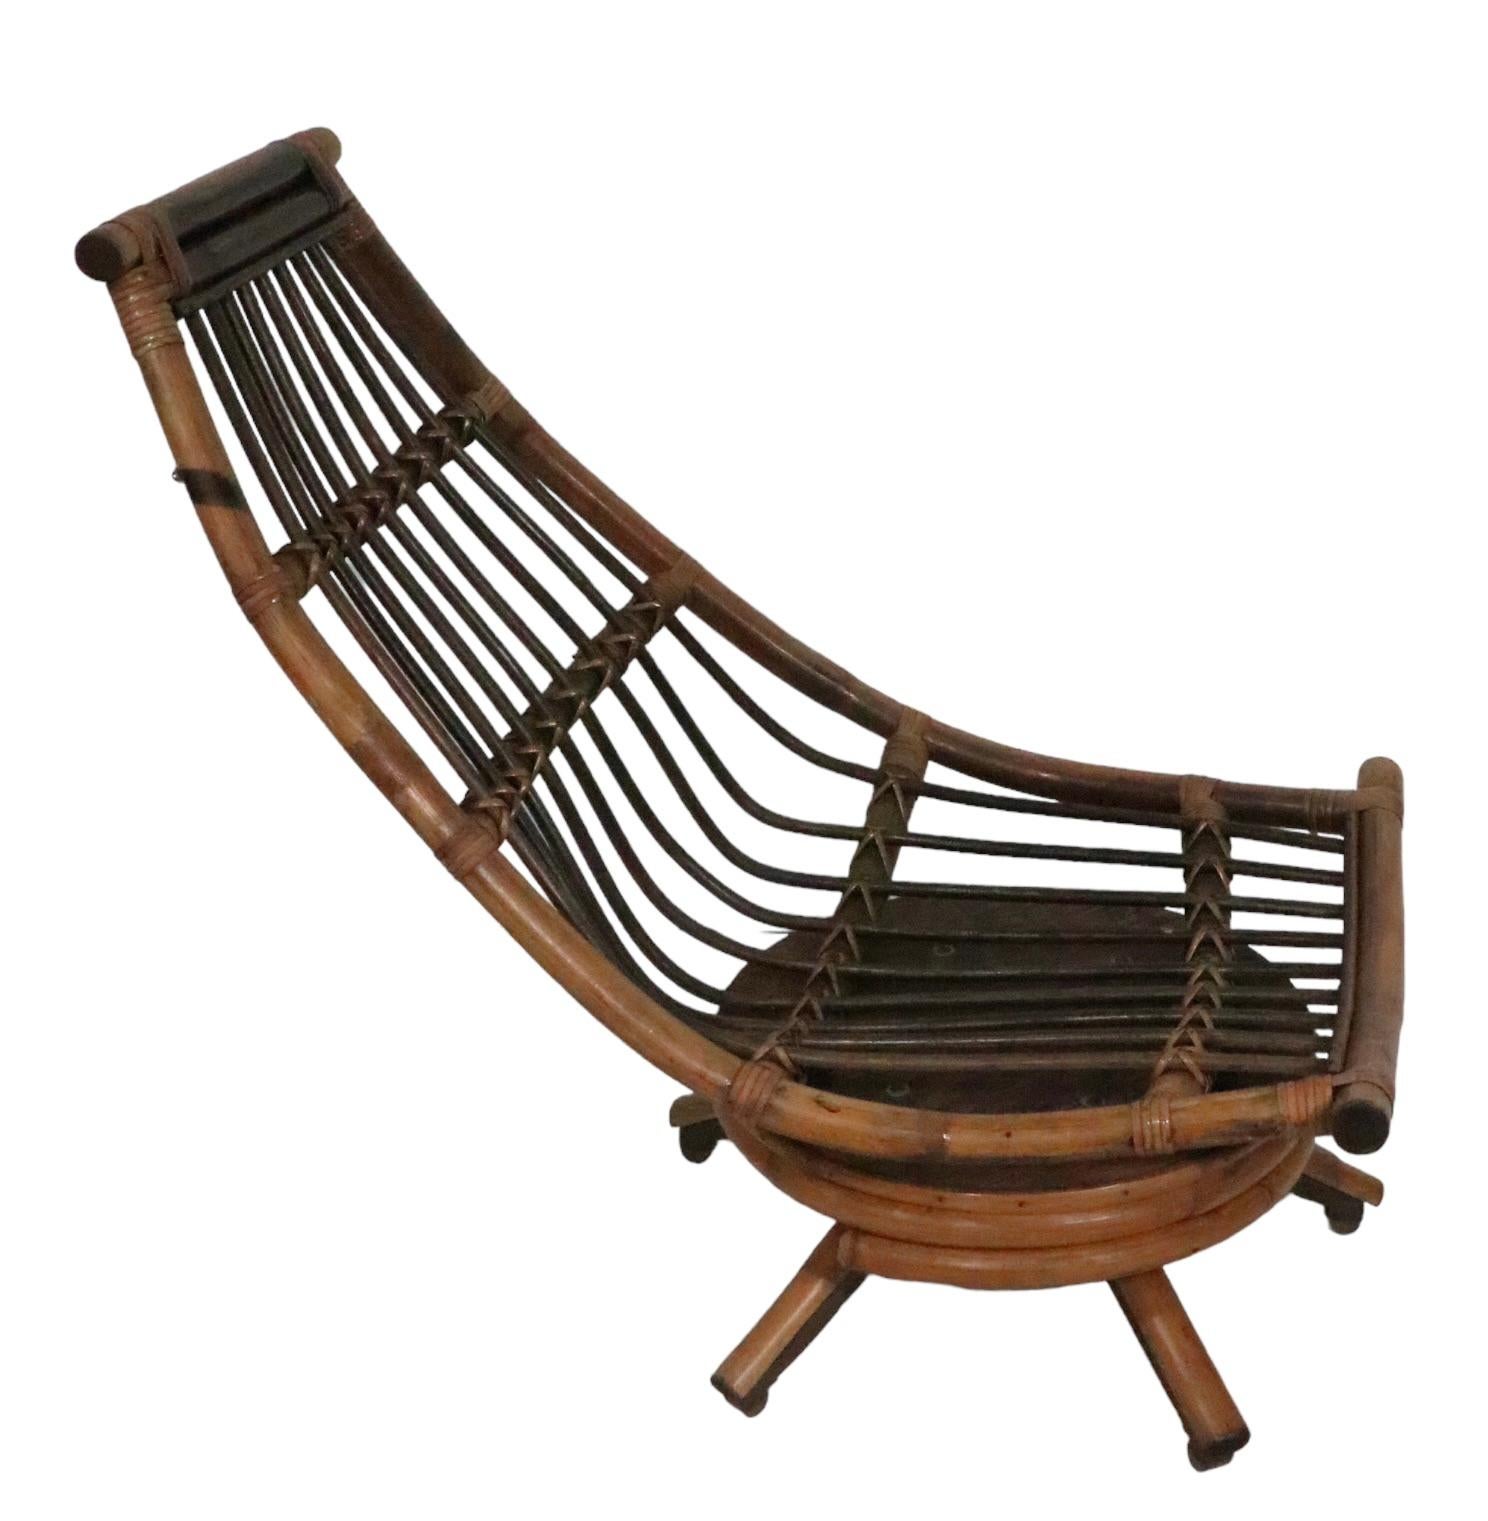 Chic midcentury bamboo platform lounge chair, having a banana shaped seat, which swivels and tilts on the circular plinth base. The chair includes a black vinyl seat pad, pad is usable as is, but shows significant wear, please see images. 
Unusual